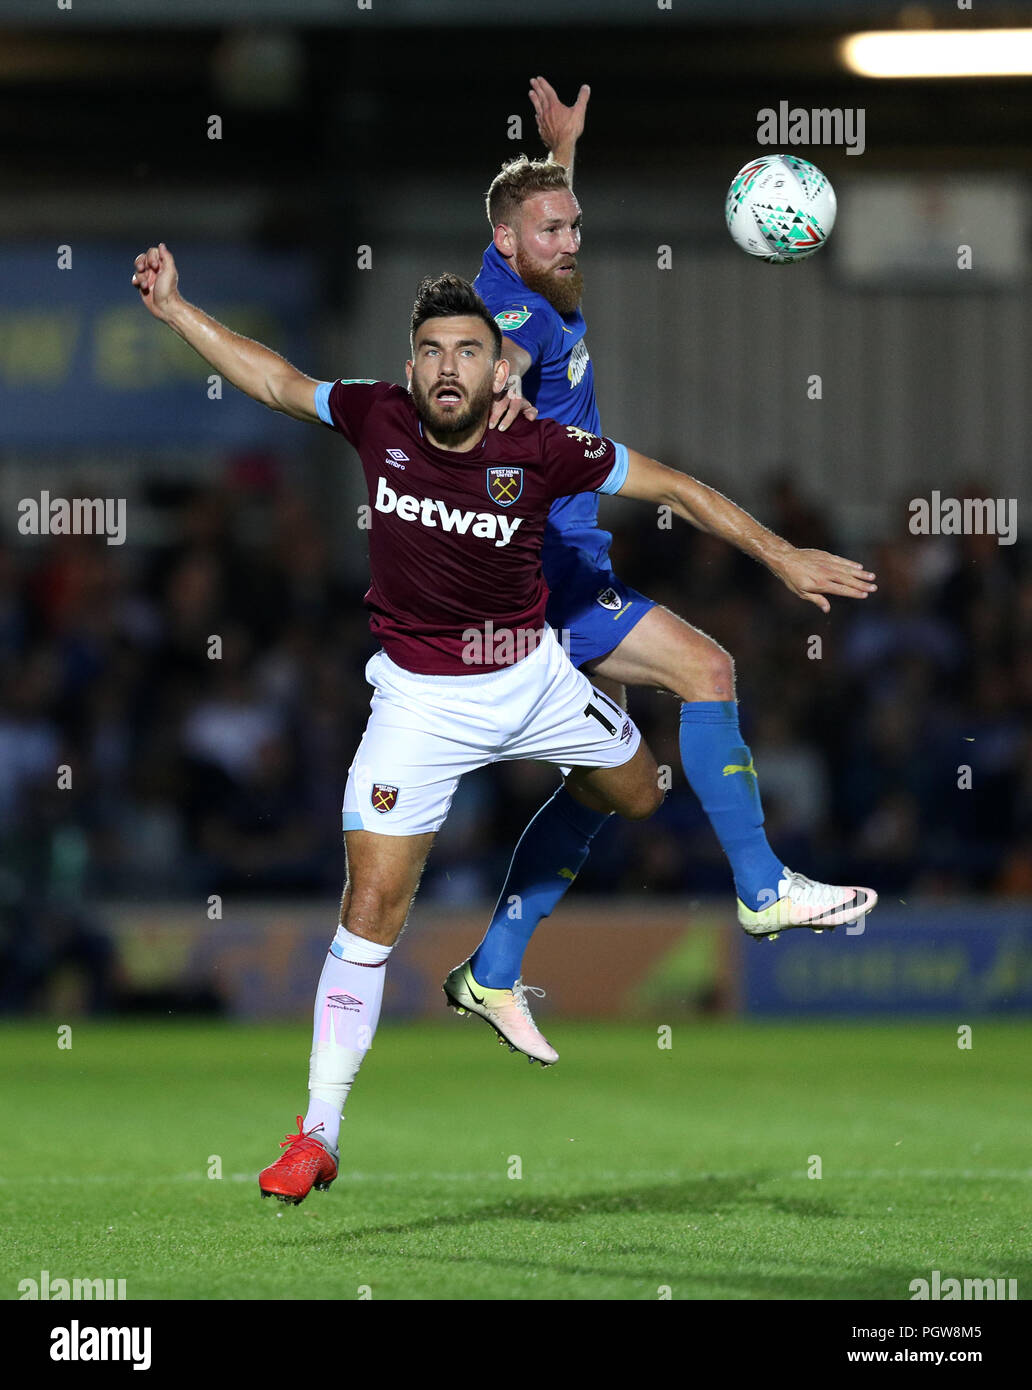 West Ham United's Robert Snodgrass and AFC Wimbledon's Scott Wagstaff battle for the ball during the Carabao Cup, second round match at Kingsmeadow, London. Stock Photo